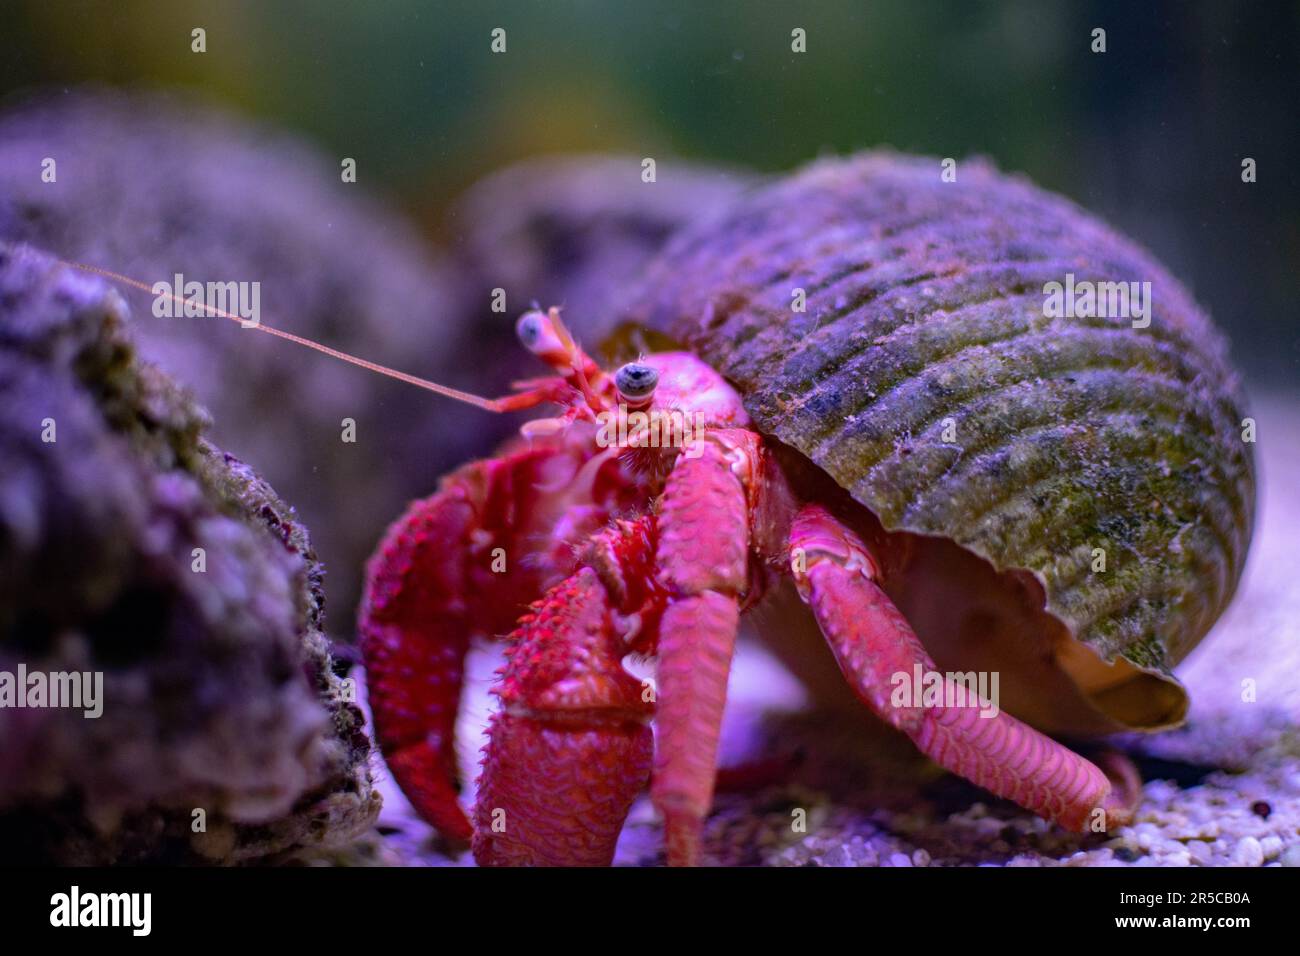 A close-up image of a red crab holding a small shell in its claws Stock Photo